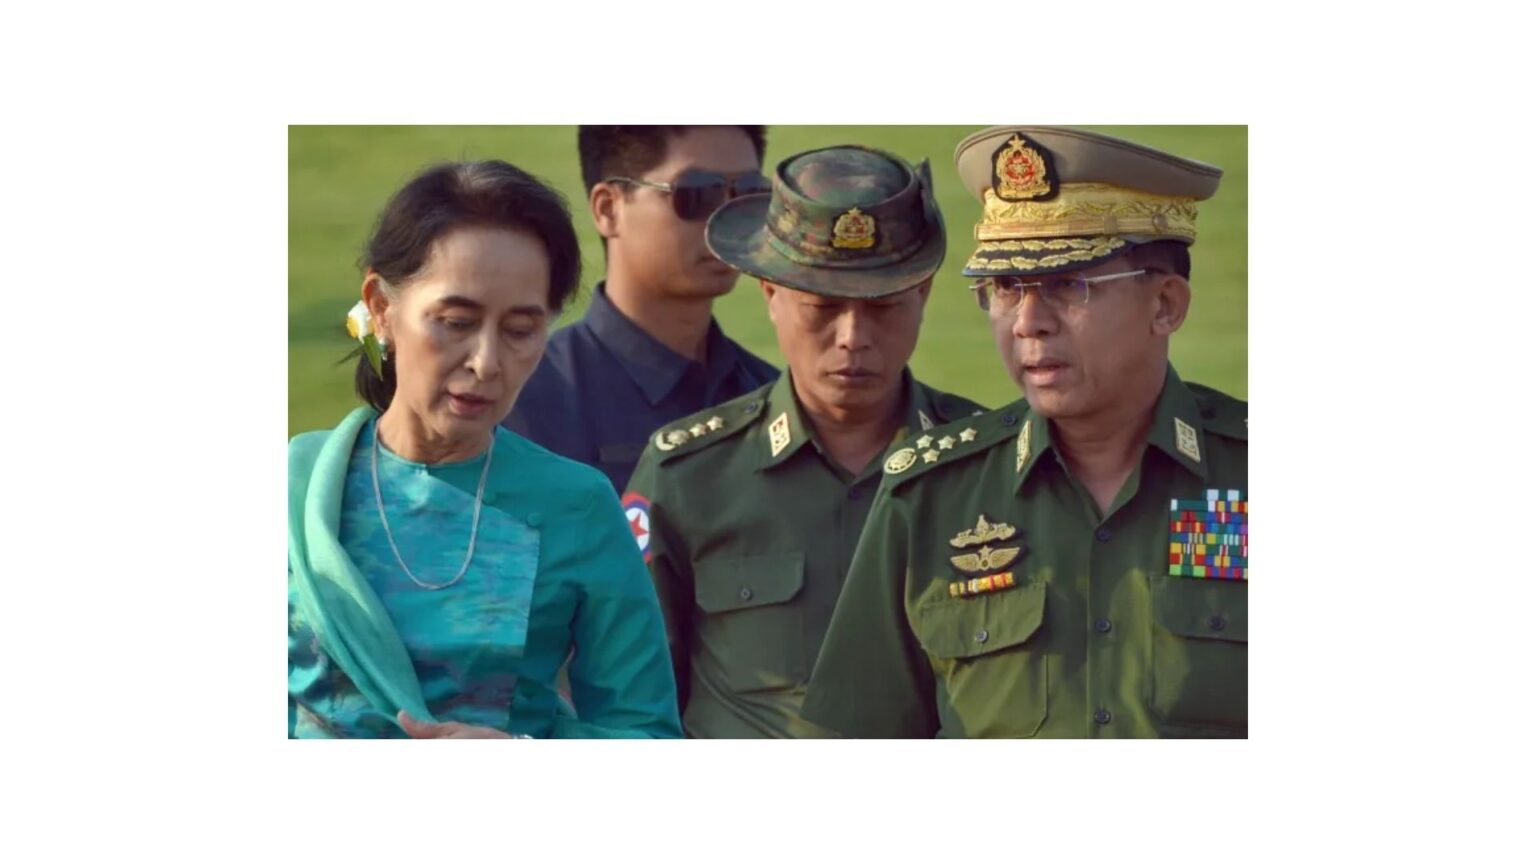 Myanmar's Supreme Court to Review Aung San Suu Kyi's Case Amid Growing International Concerns - Asiana Times